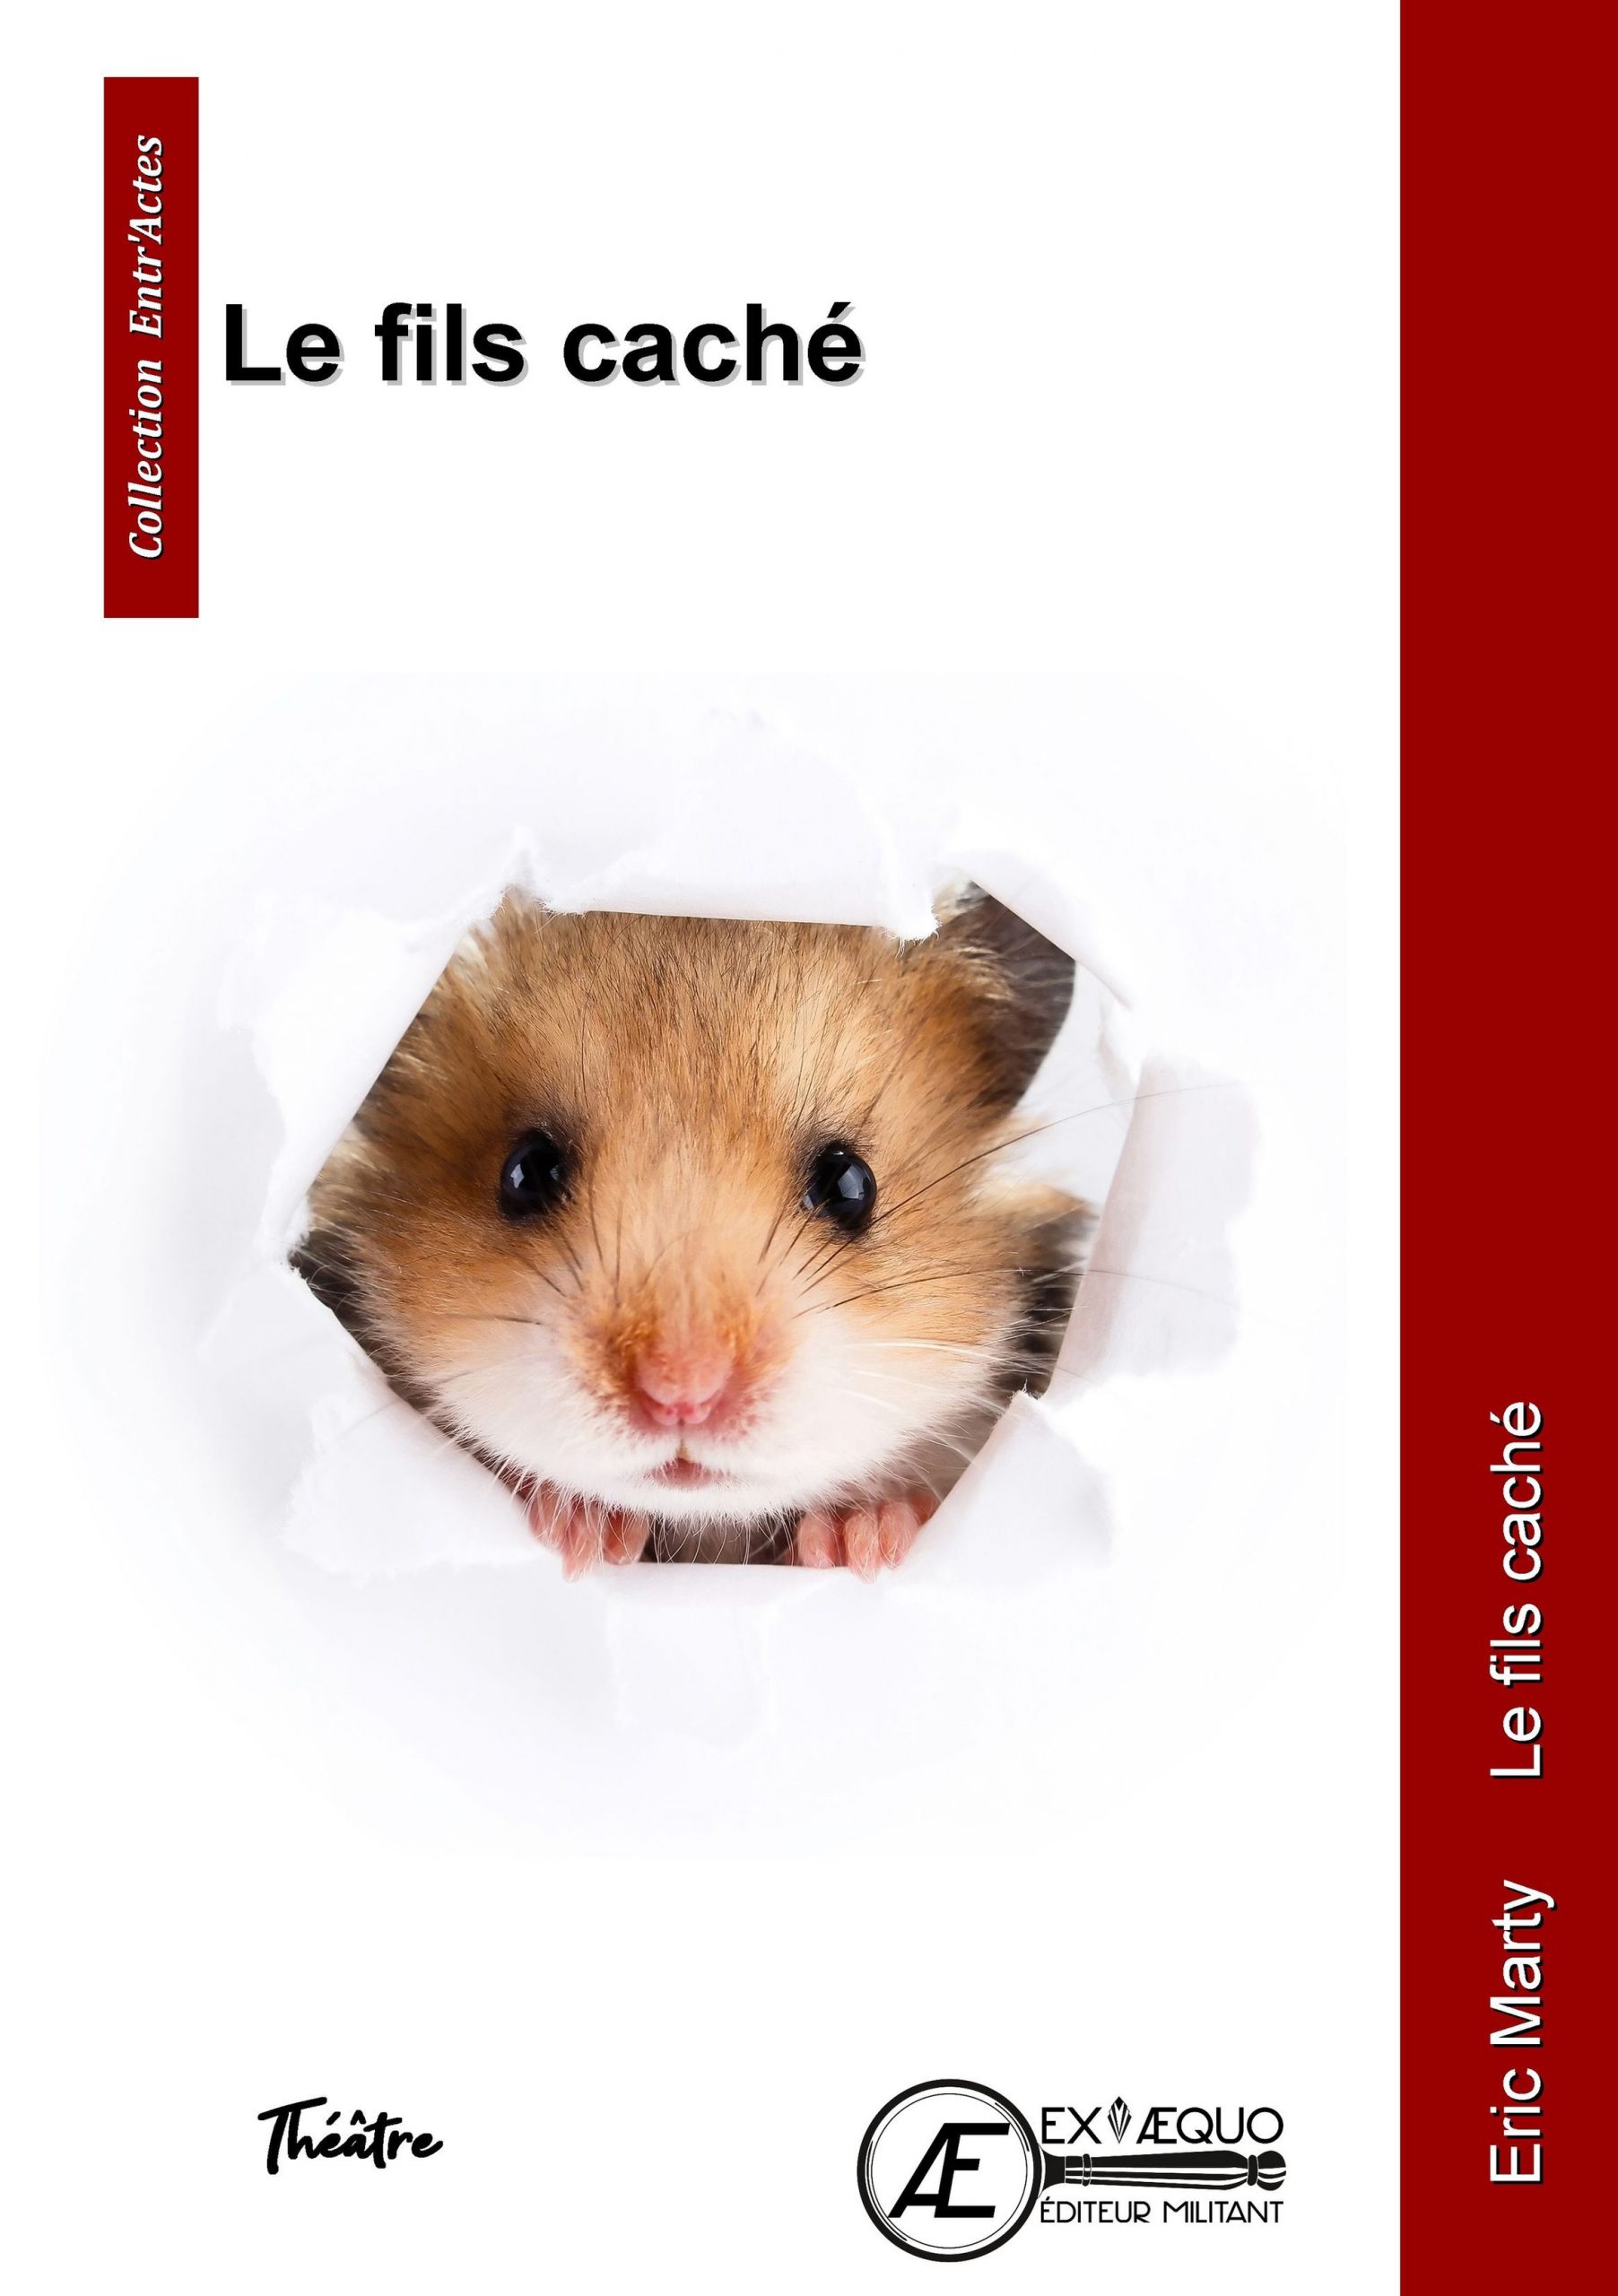 You are currently viewing Le fils caché